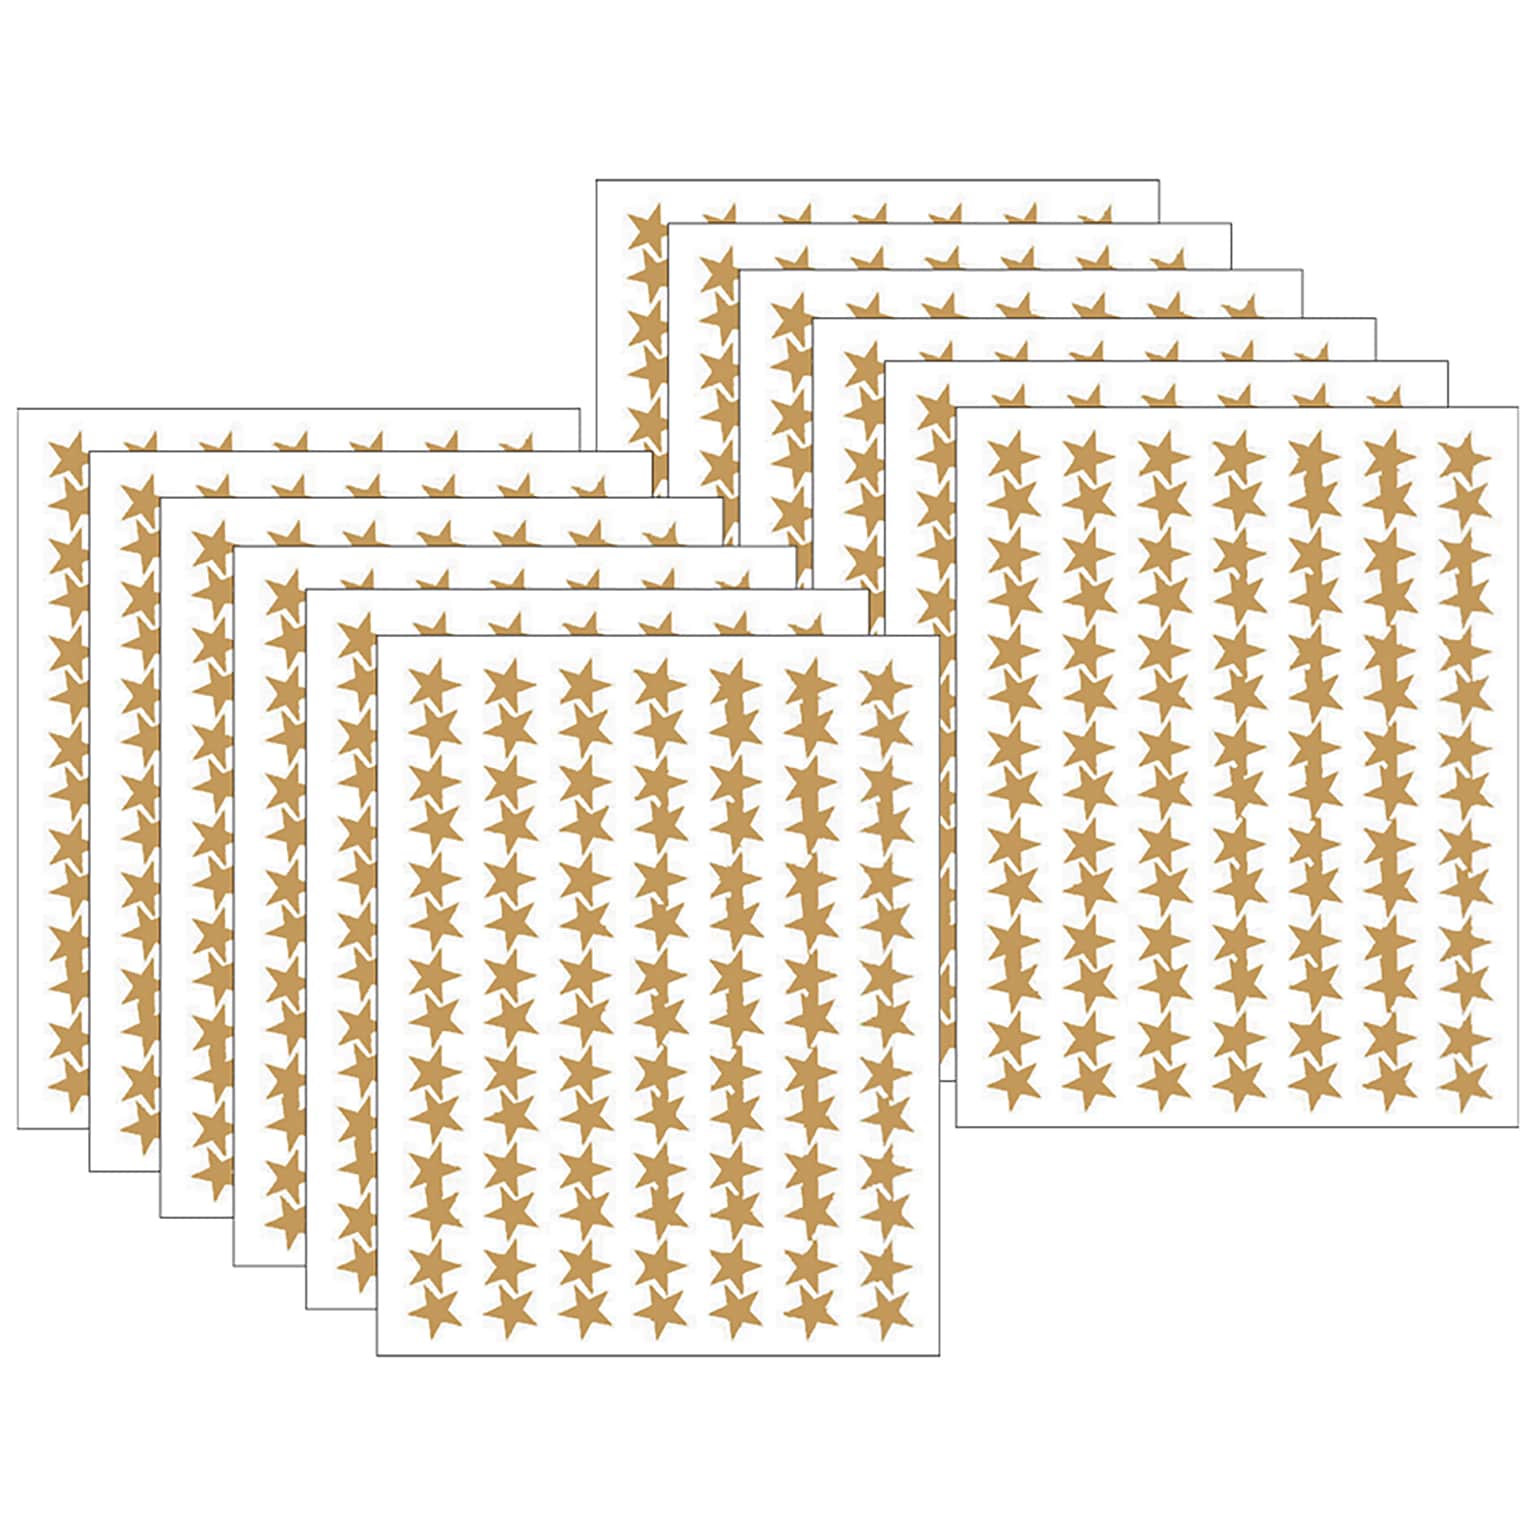 Teacher Created Resources Gold Stars Foil Stickers, 294 Per Pack, 12 Packs (TCR1276-12)